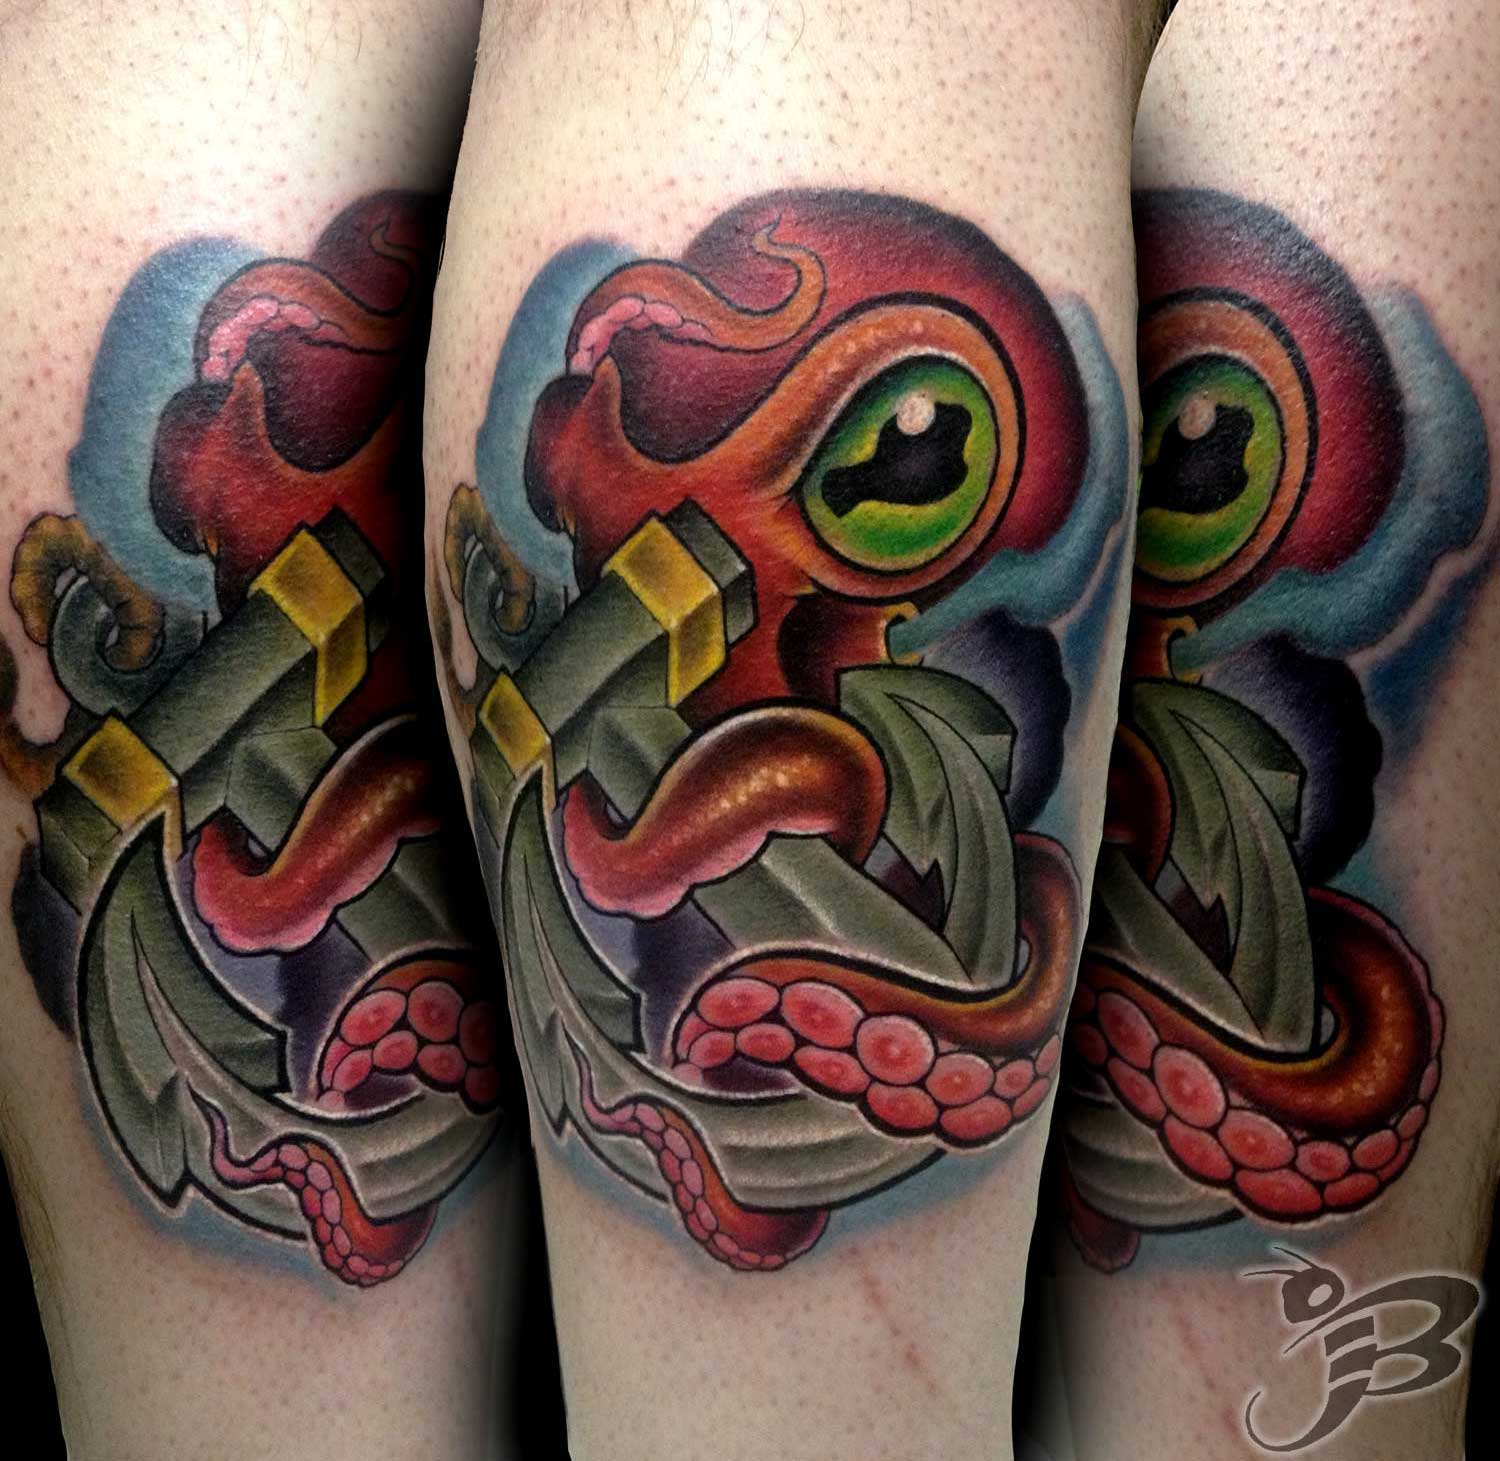 Colorful 3D Octopus With Anchor Tattoo Design For Leg Calf